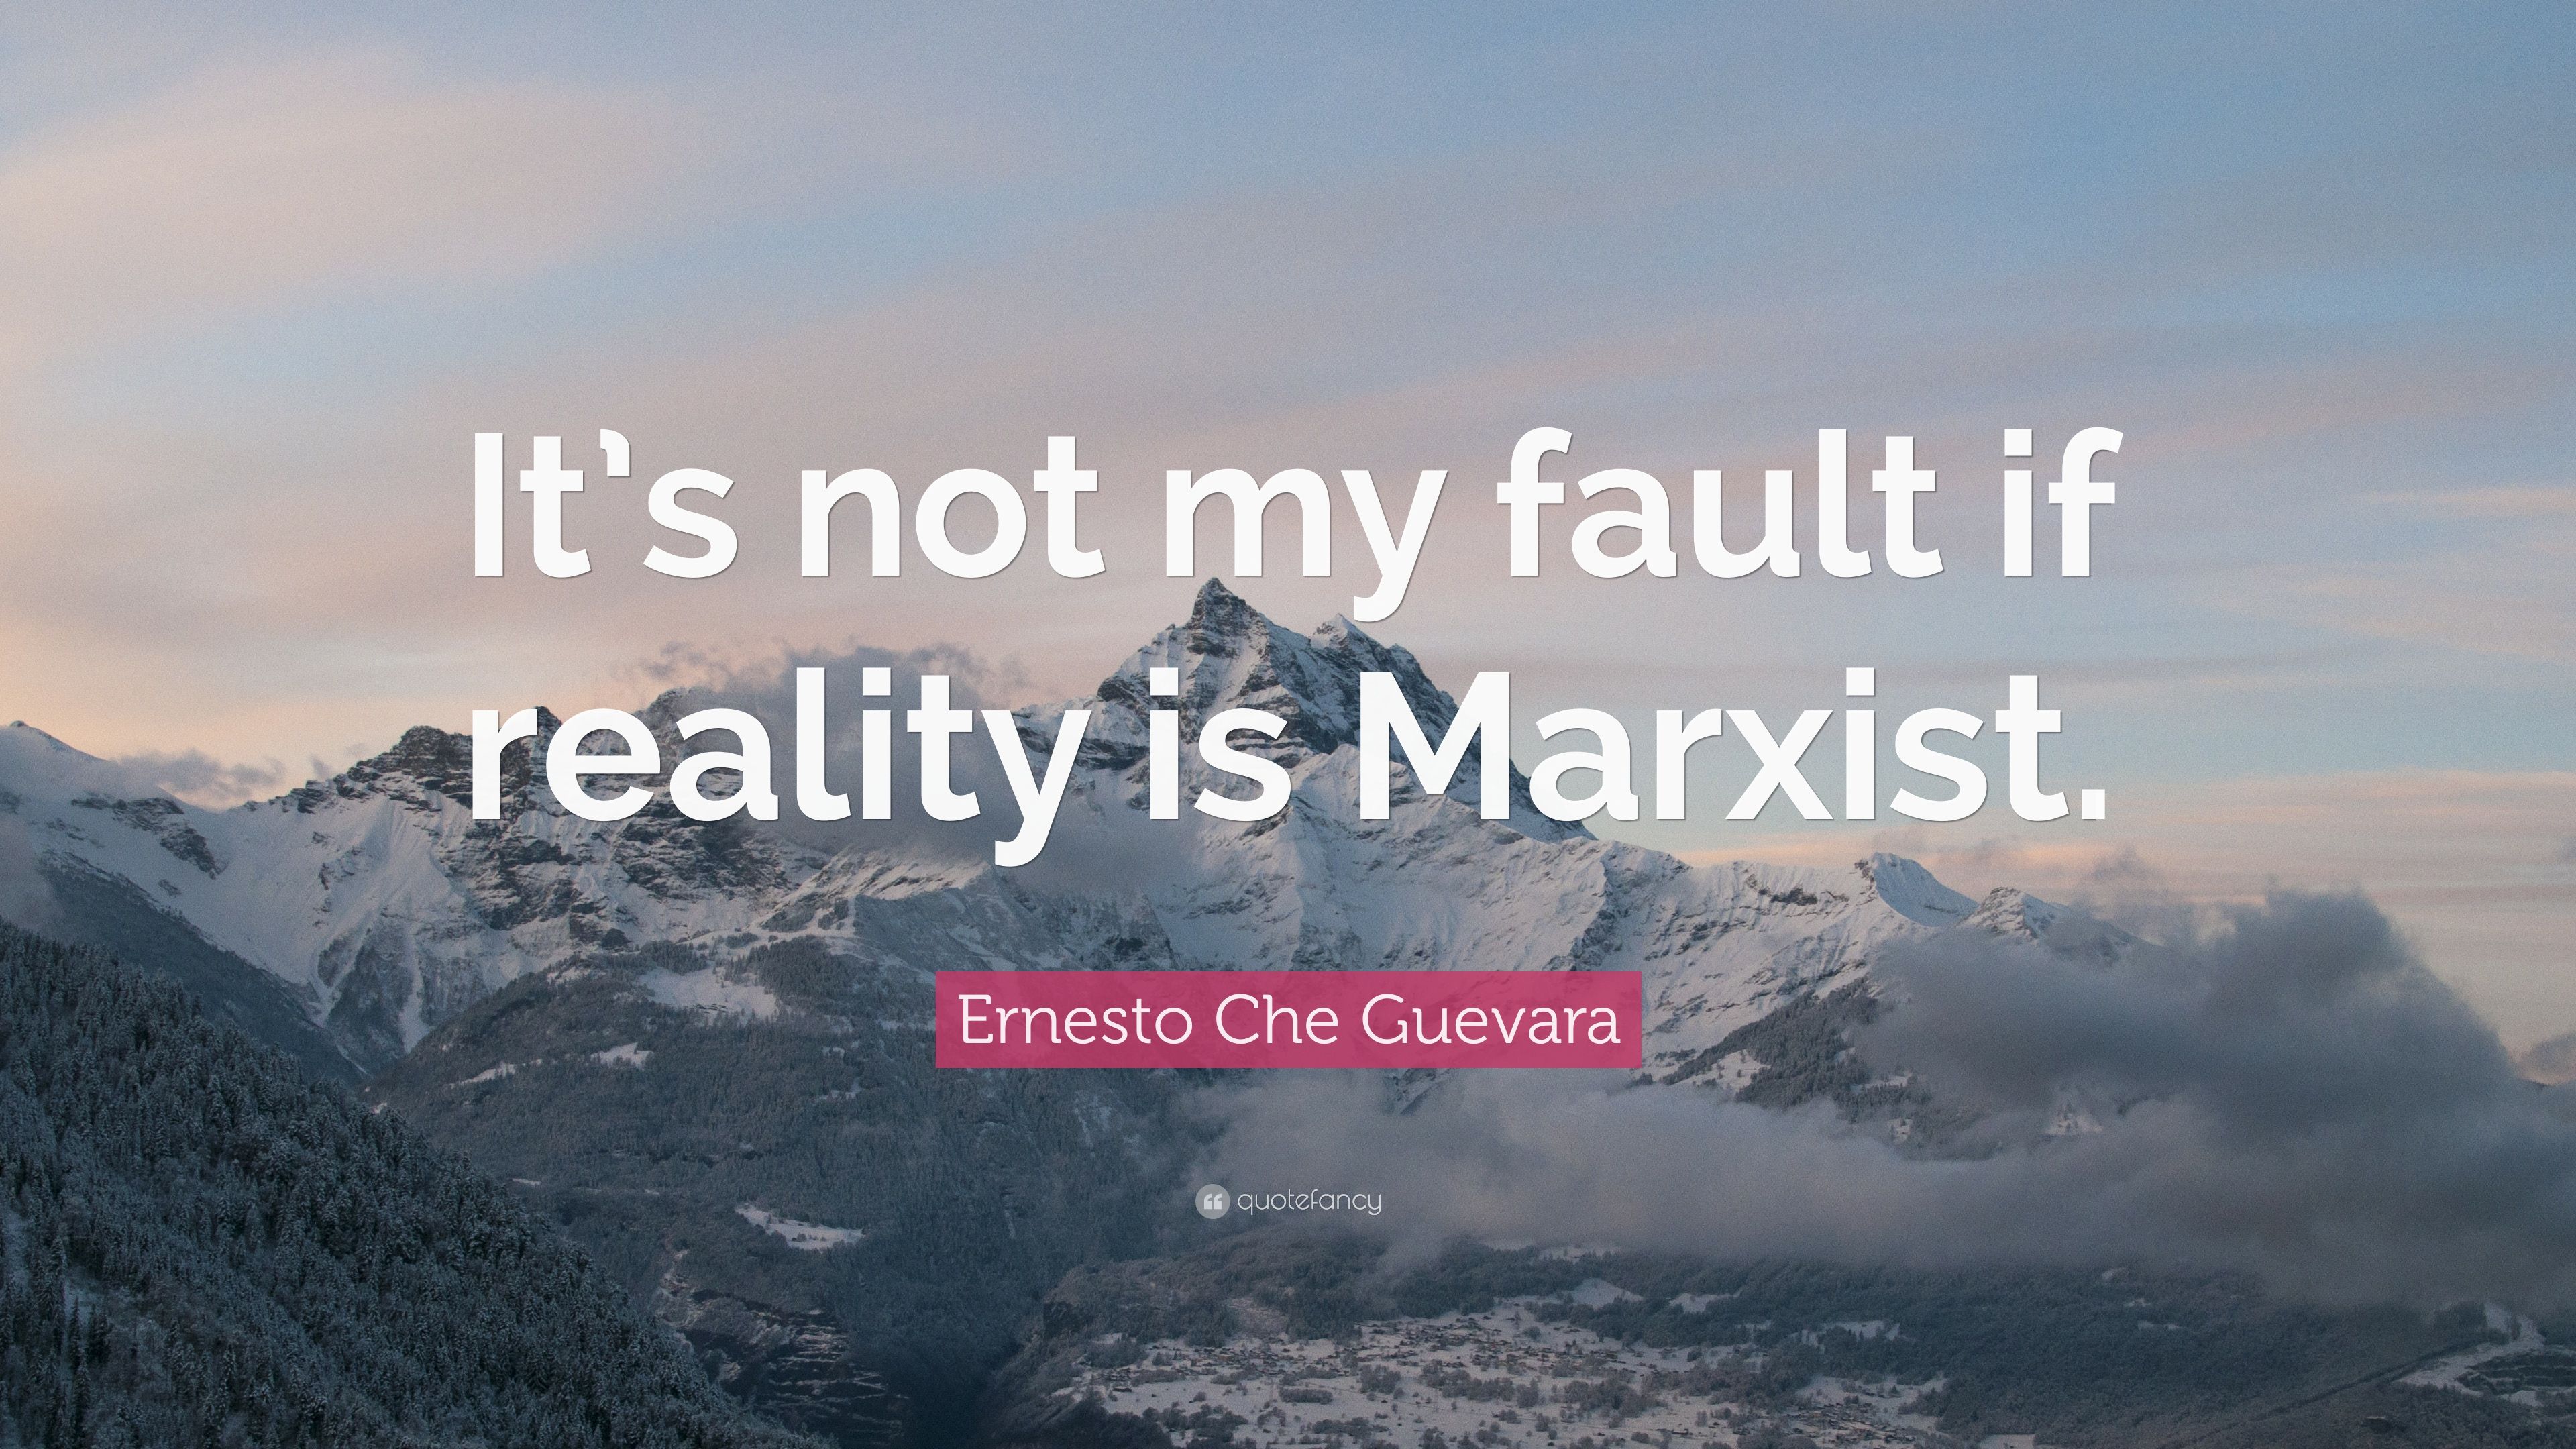 Ernesto Che Guevara Quote: “It's not my fault if reality is Marxist